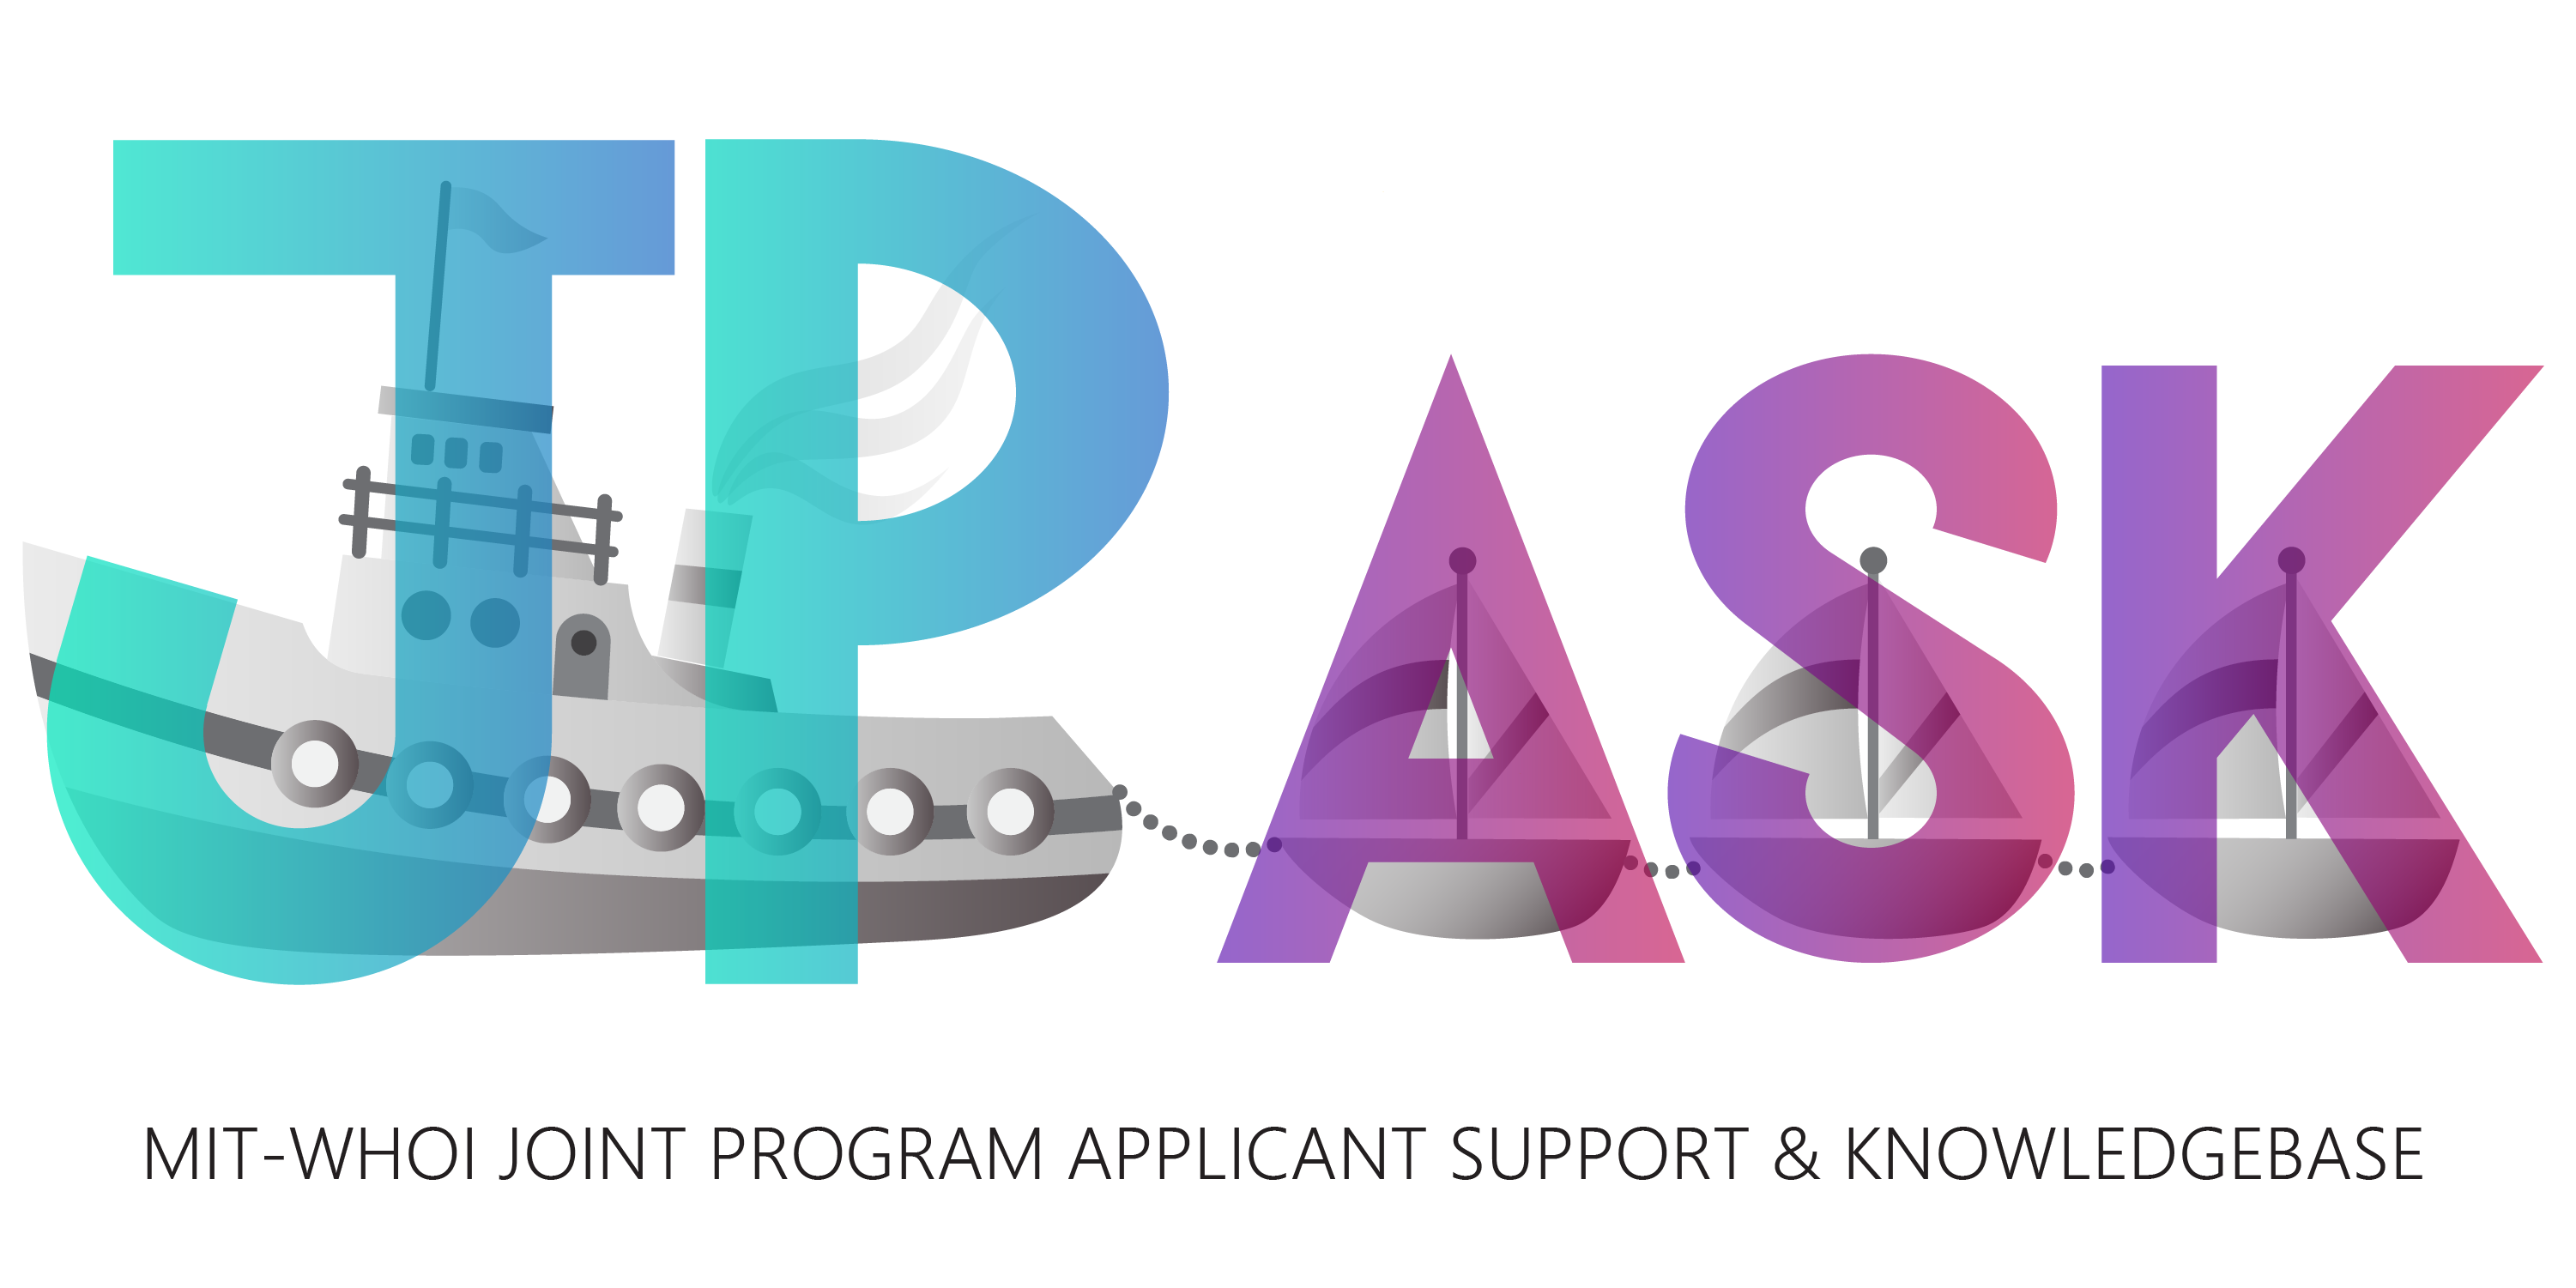 JP ASK is a mentorship program intended to advise and support prospective students through the graduate application process by pairing prospective applicant mentees with current graduate student mentors.